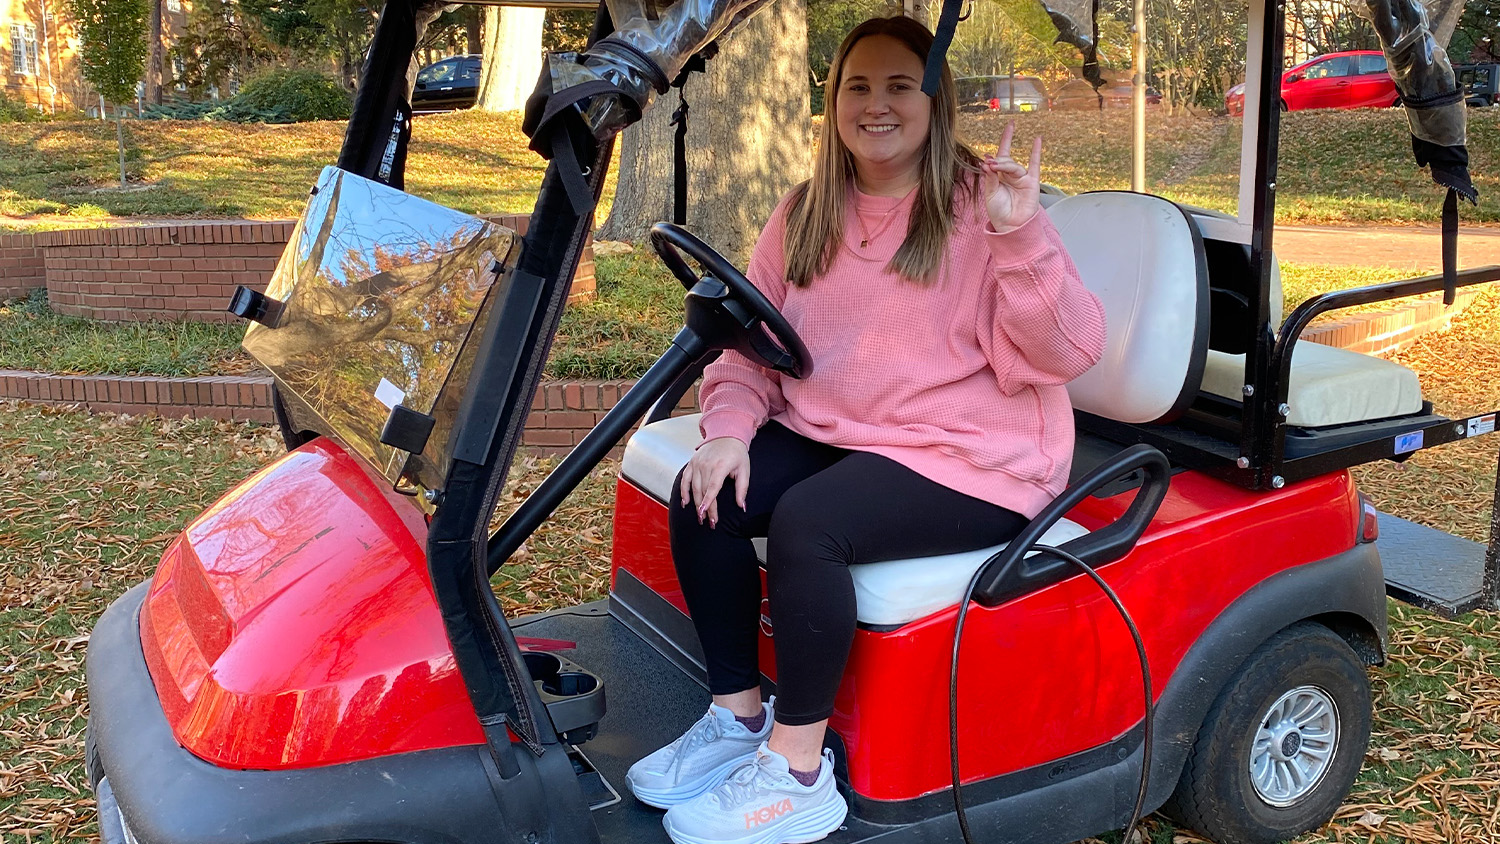 Brock Derrow sitting in the driver's seat of a red golf cart and making a wolfie sign with her hand